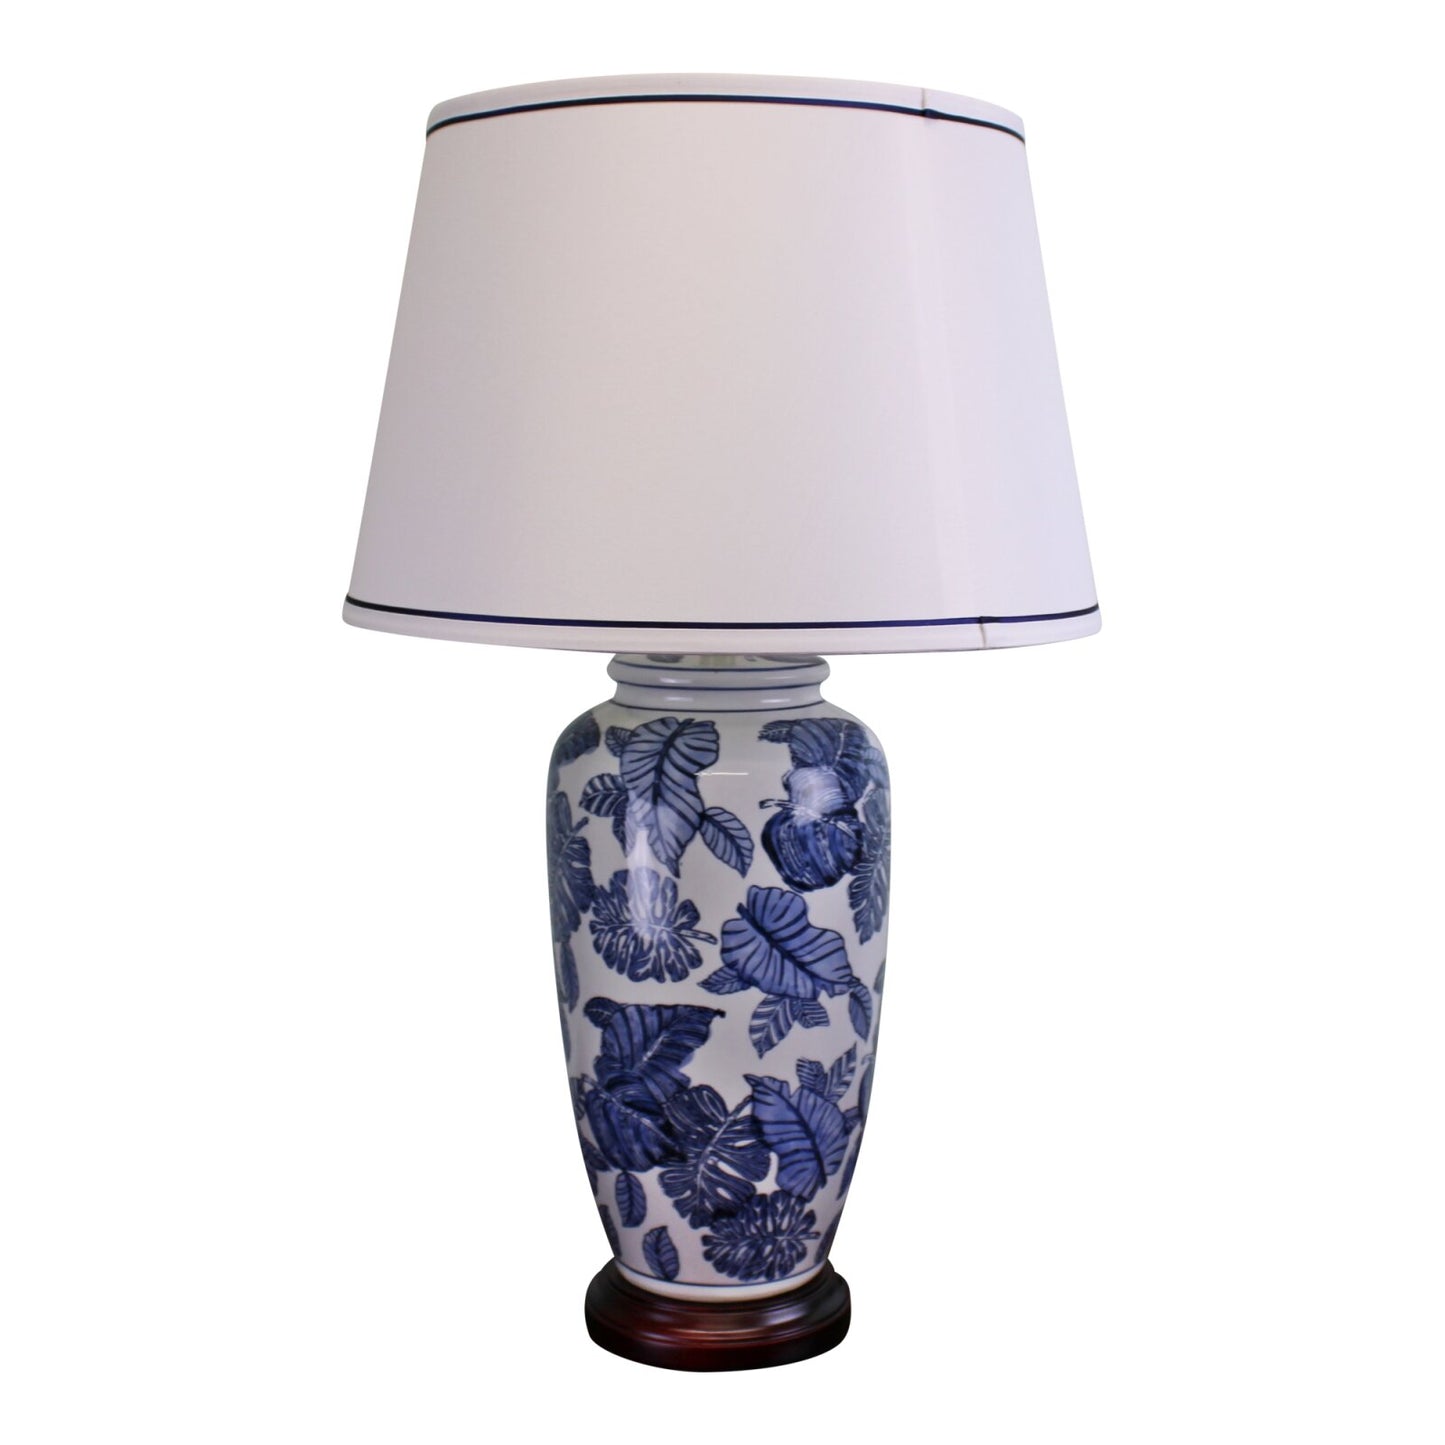 Blue & White Ceramic Lamp with Wooden Base 70cm